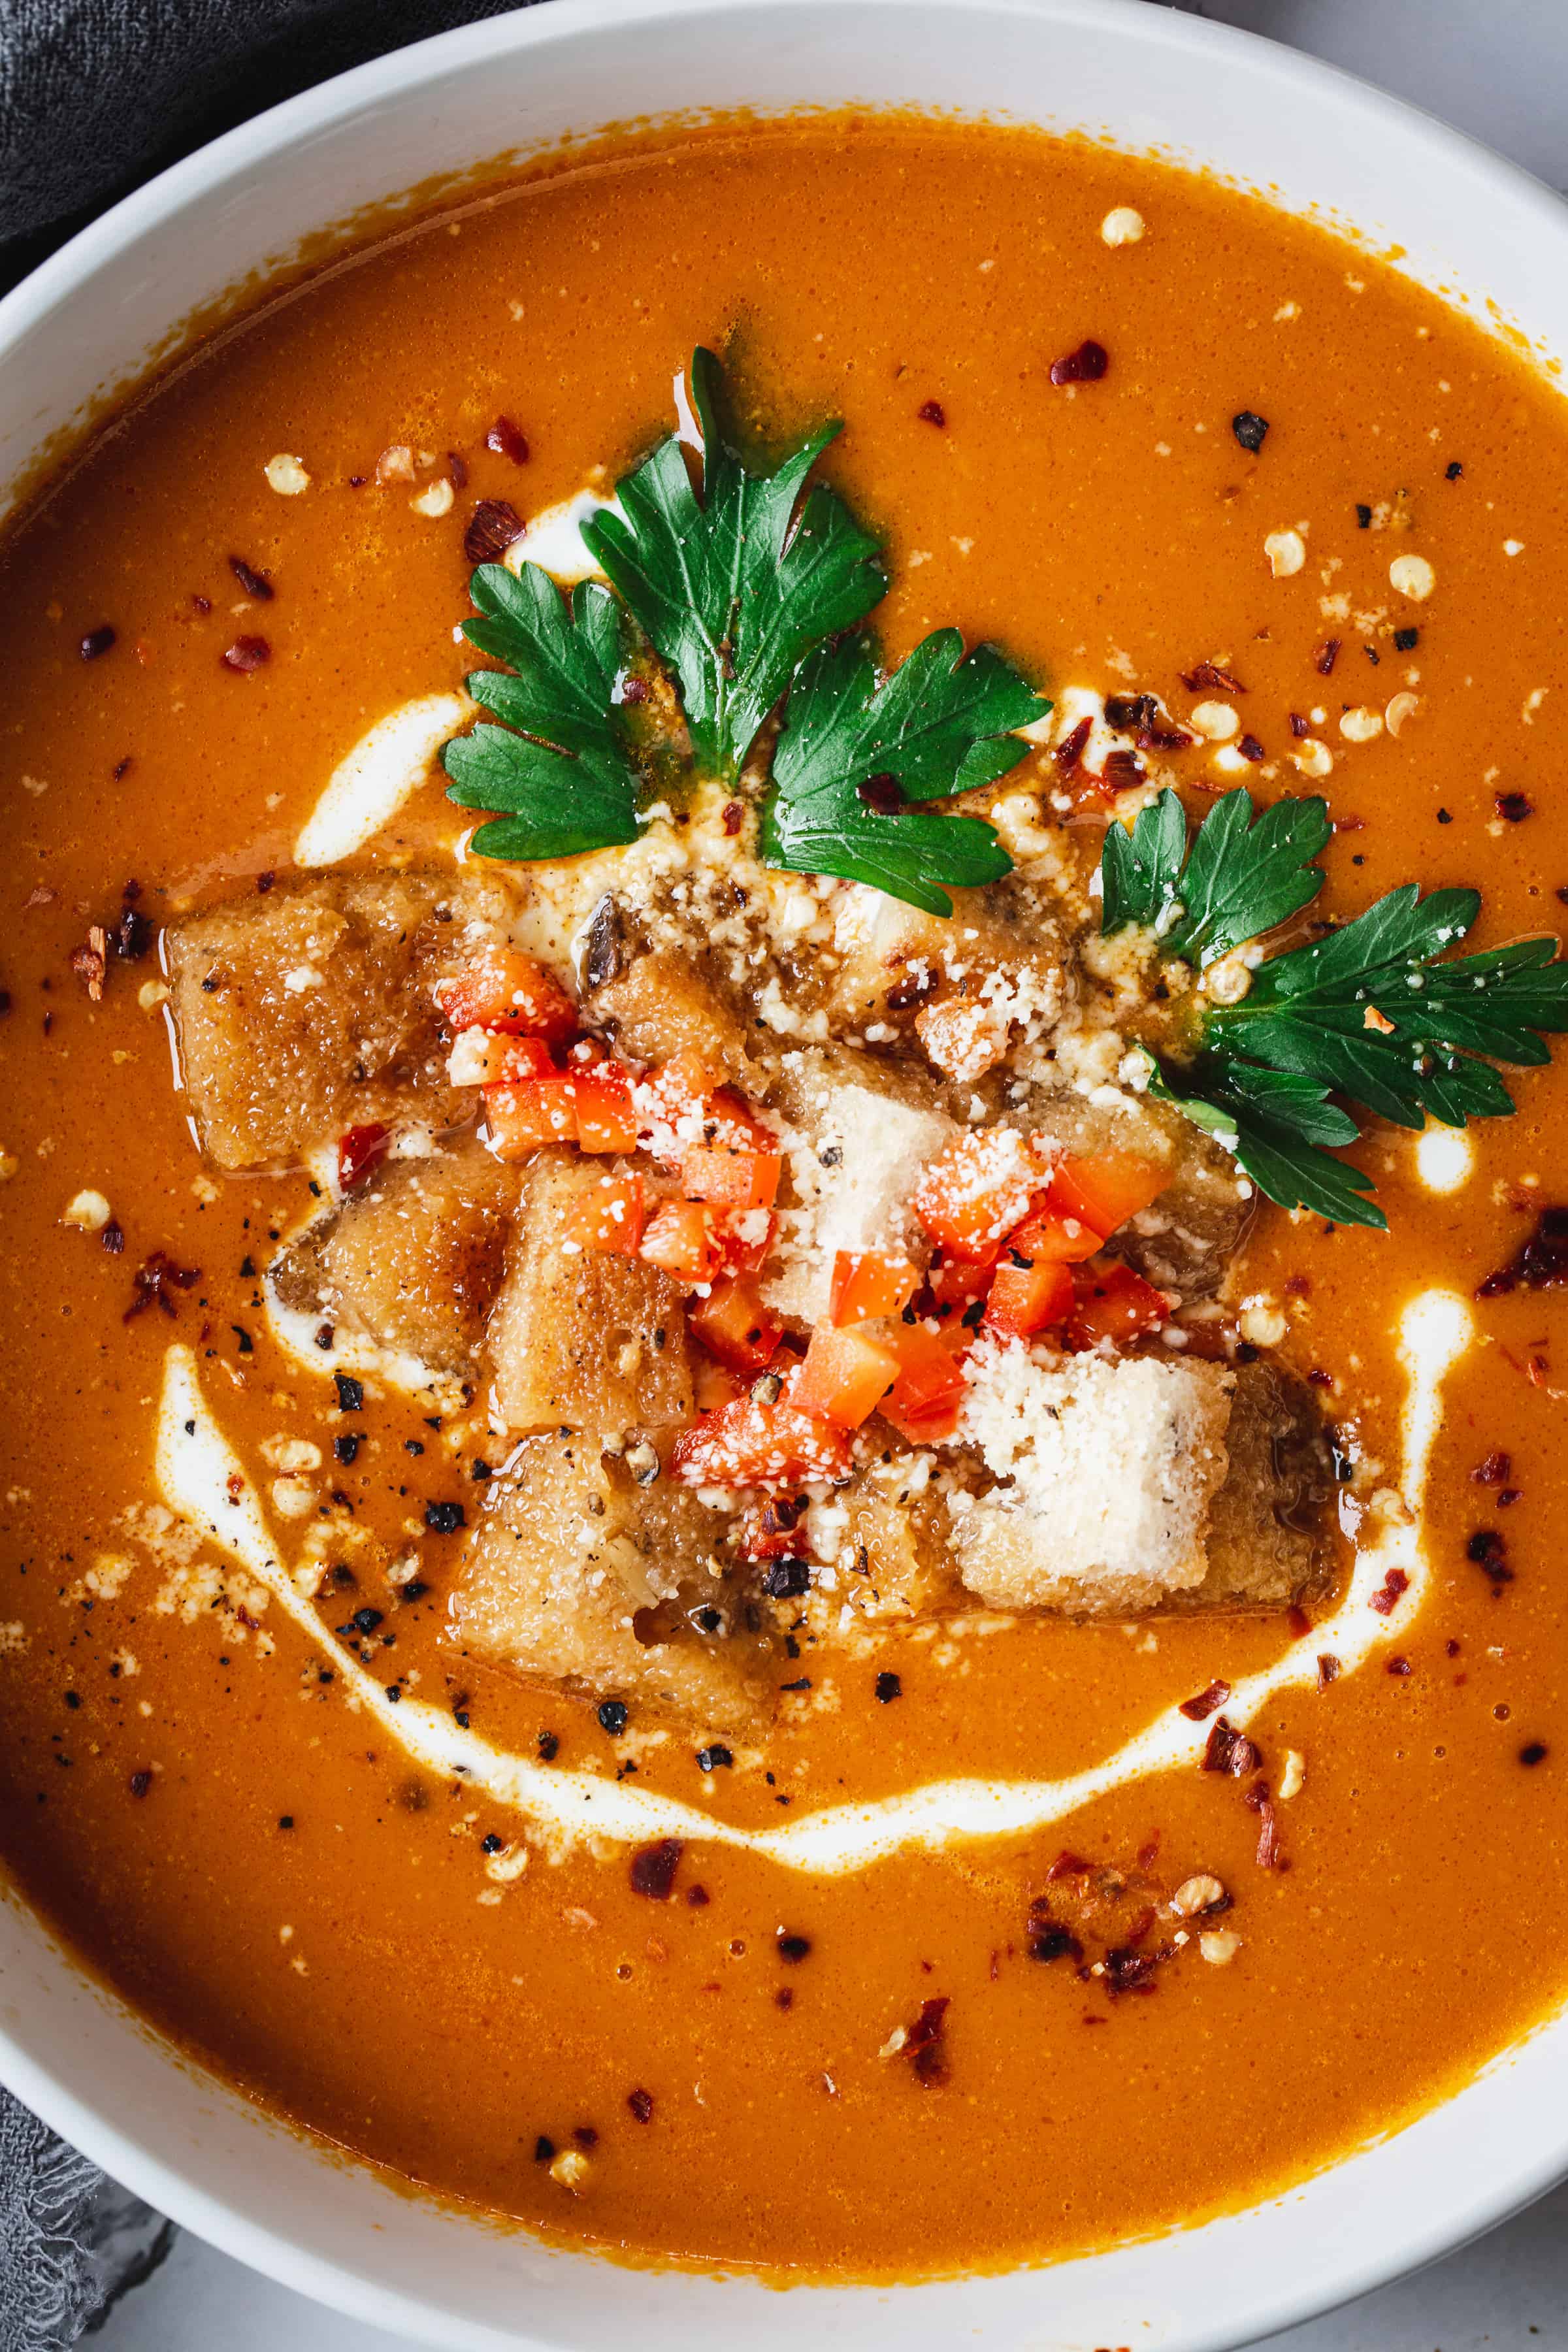 A bowl of creamy tomato bisque garnished with croutons, chopped red bell peppers, fresh parsley, and a drizzle of cream, sprinkled with crushed black pepper.